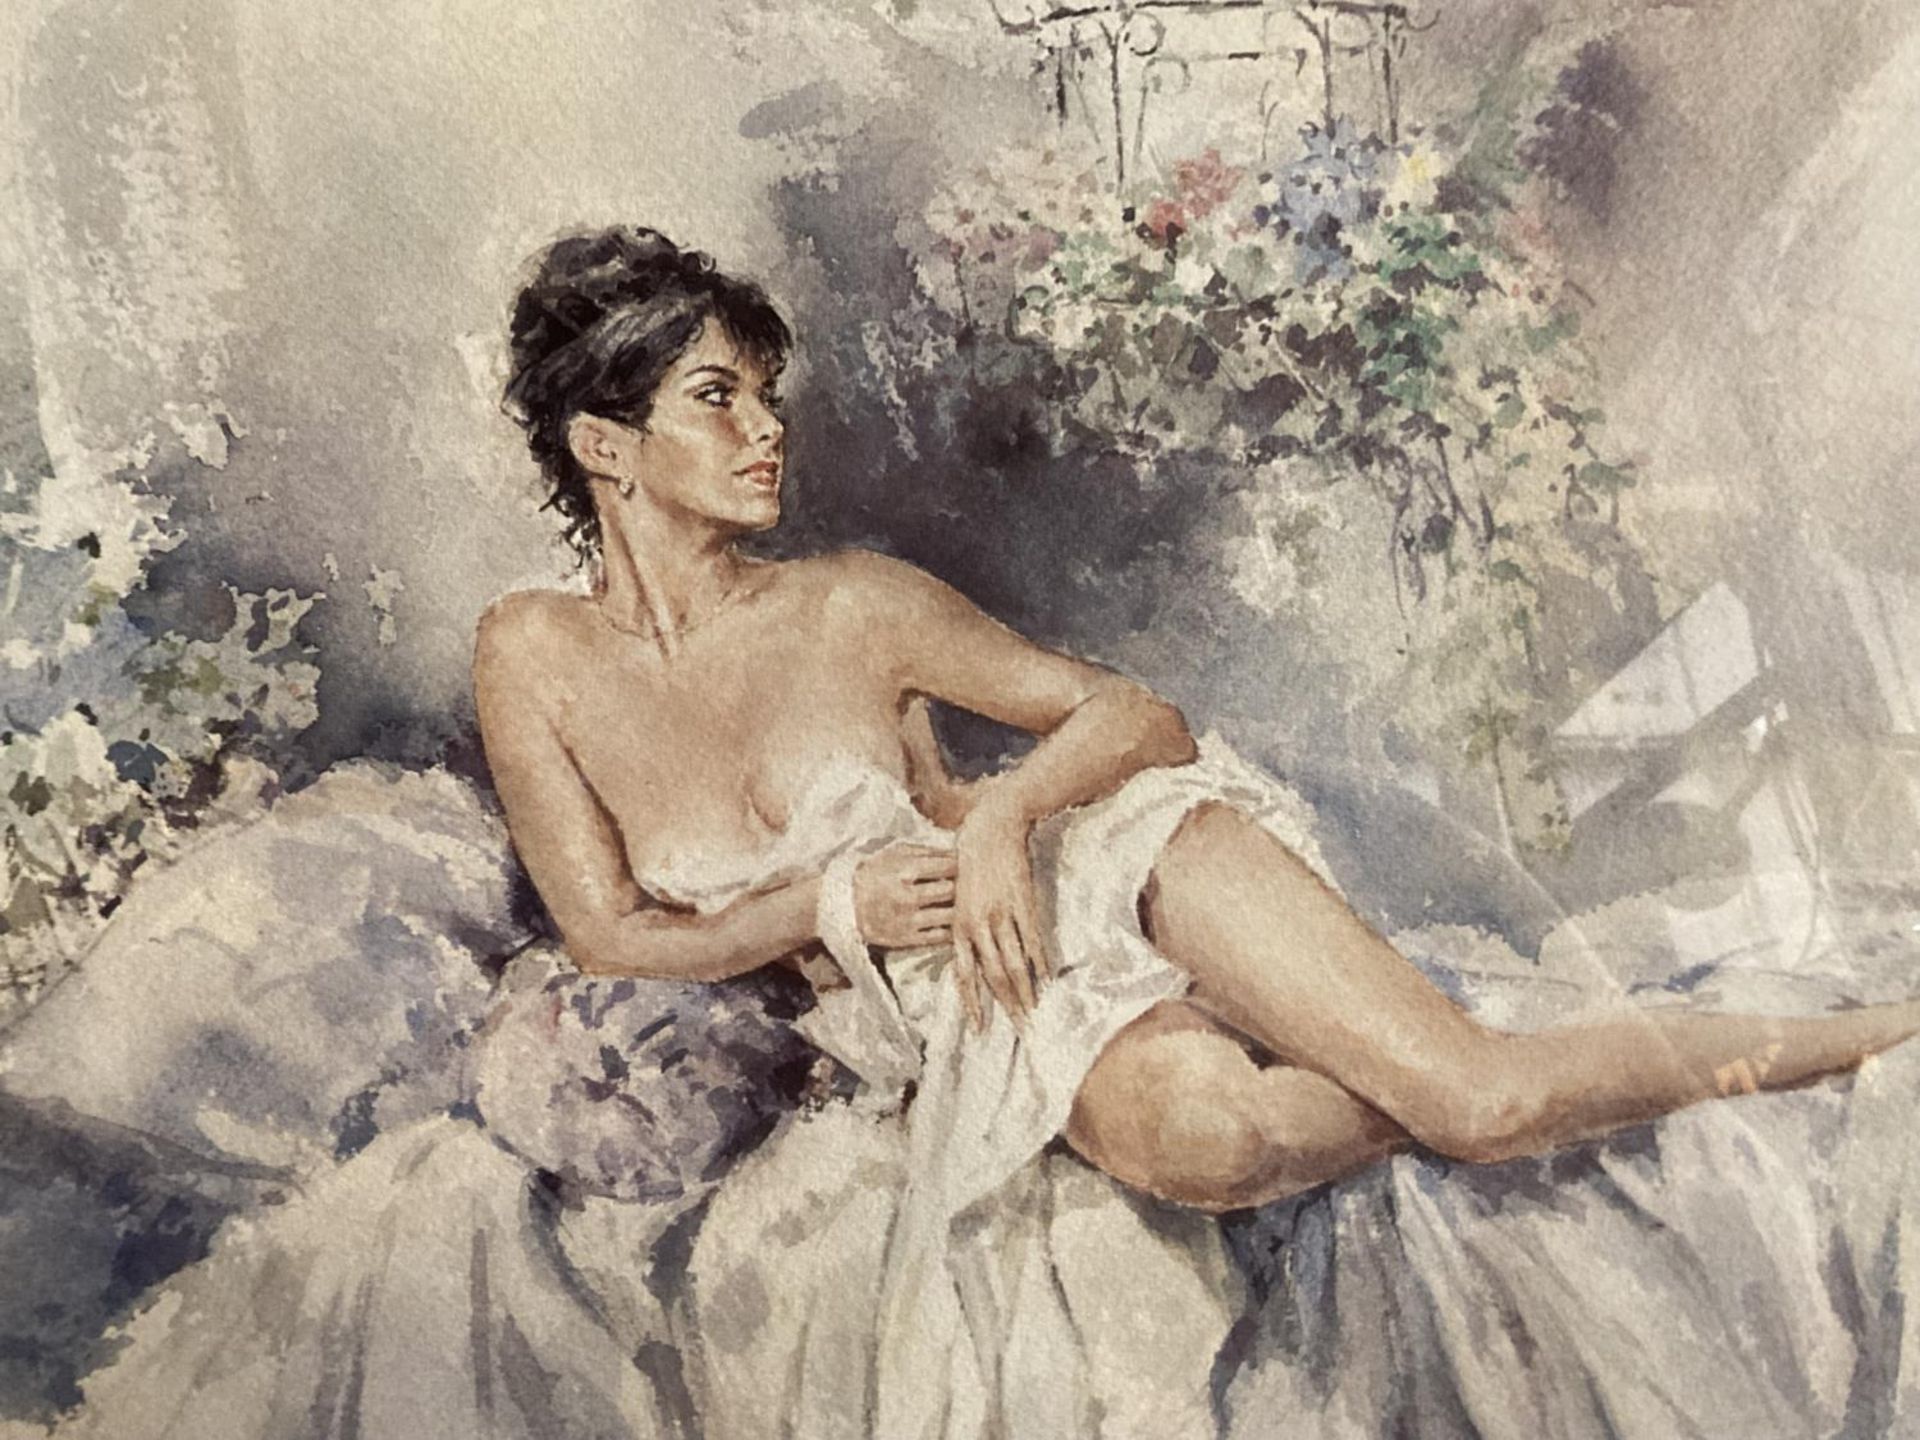 A LARGE ORNATE FRAMED LIMITED EDITION PRINT BY GORDON KING SIGNED IN PENCIL "ALEXANDRA" 60 x 47 CM - Image 2 of 4